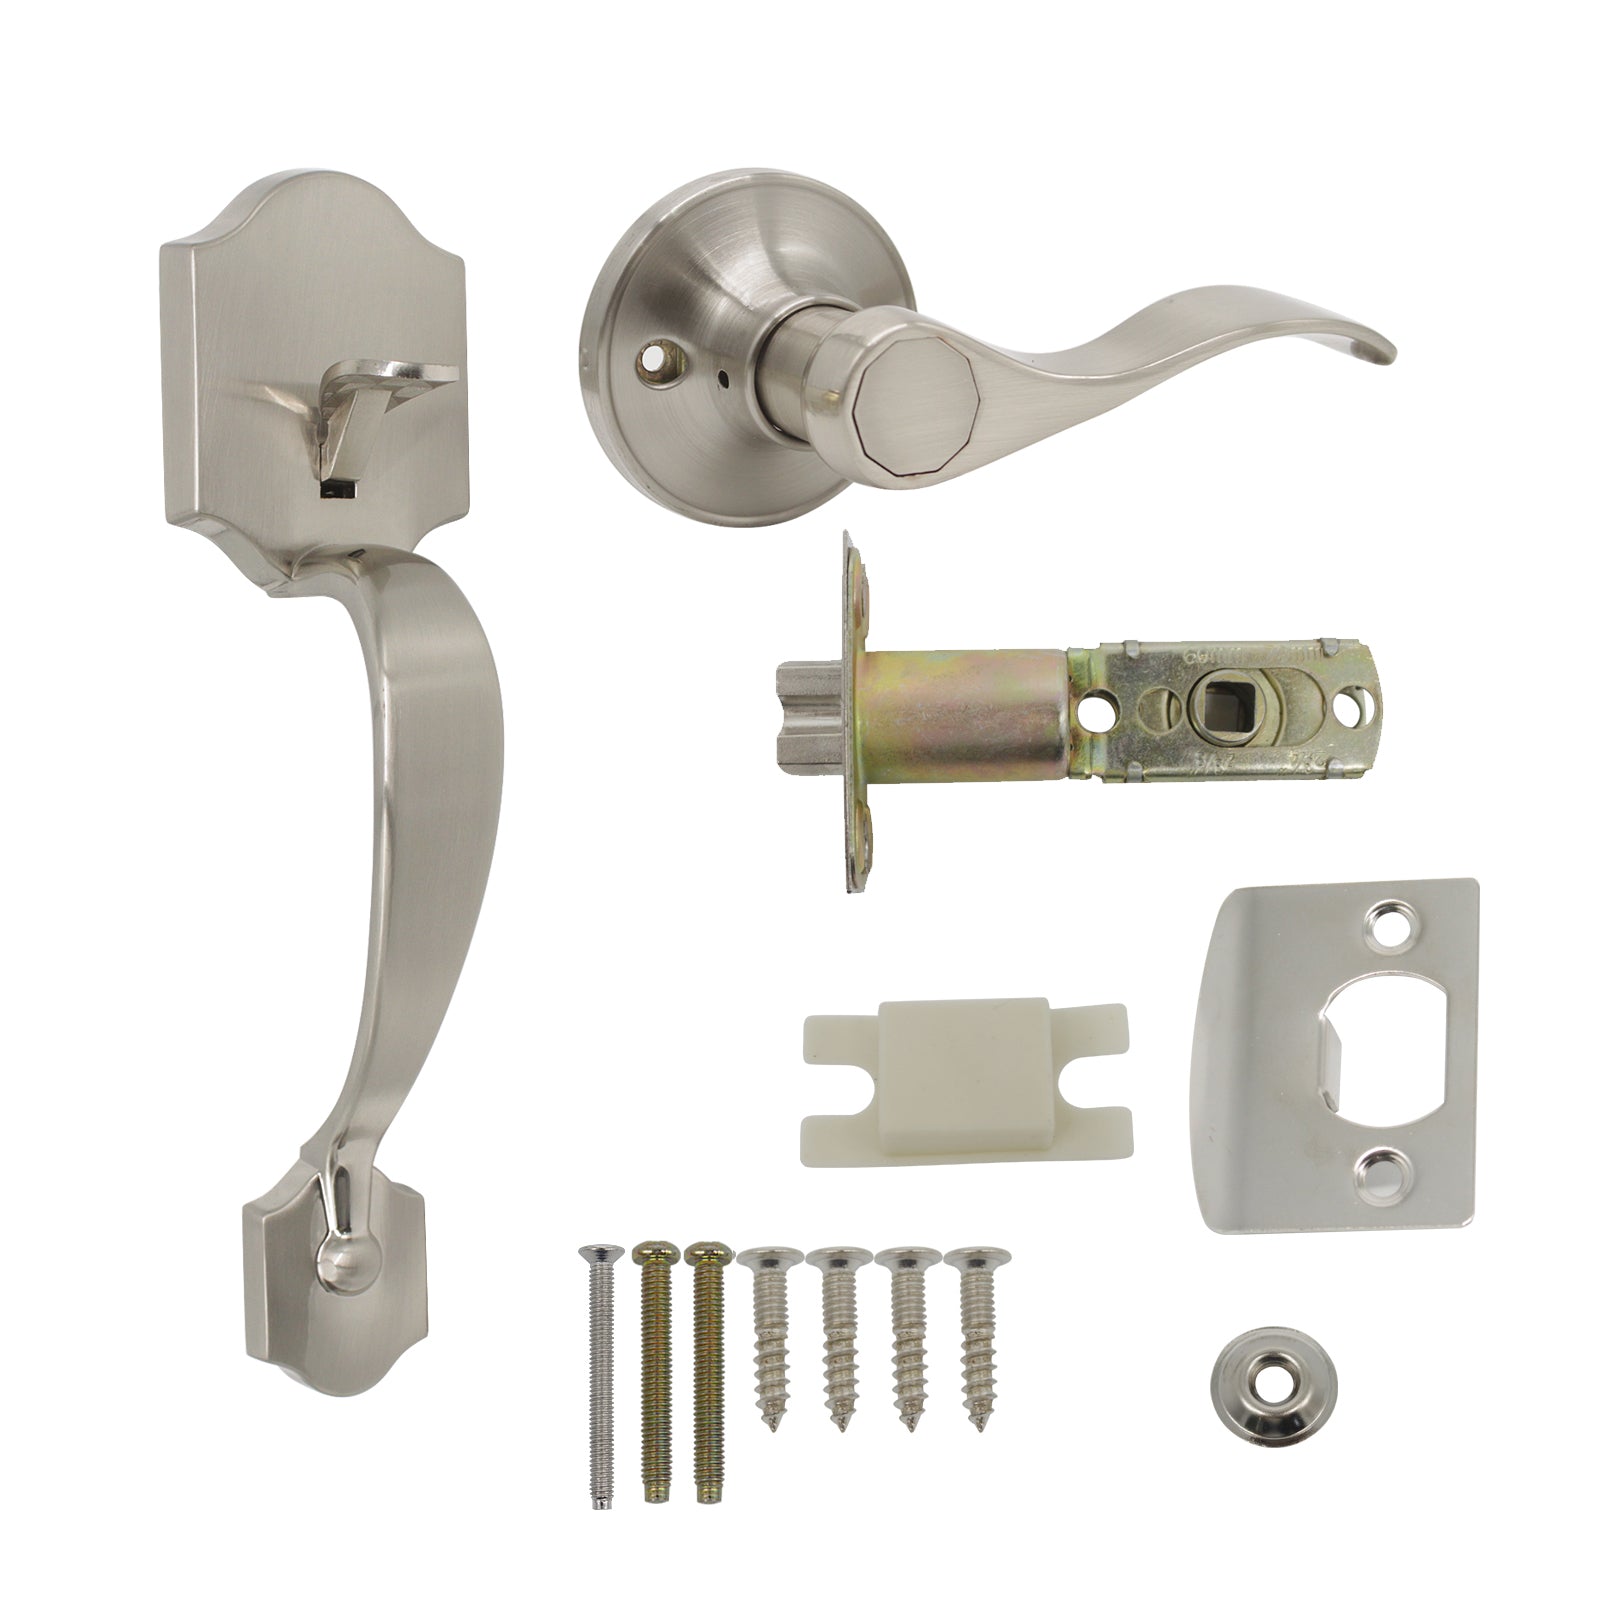 Tinewa Single Cylinder Handleset, Front Door Handle with Lever Inside